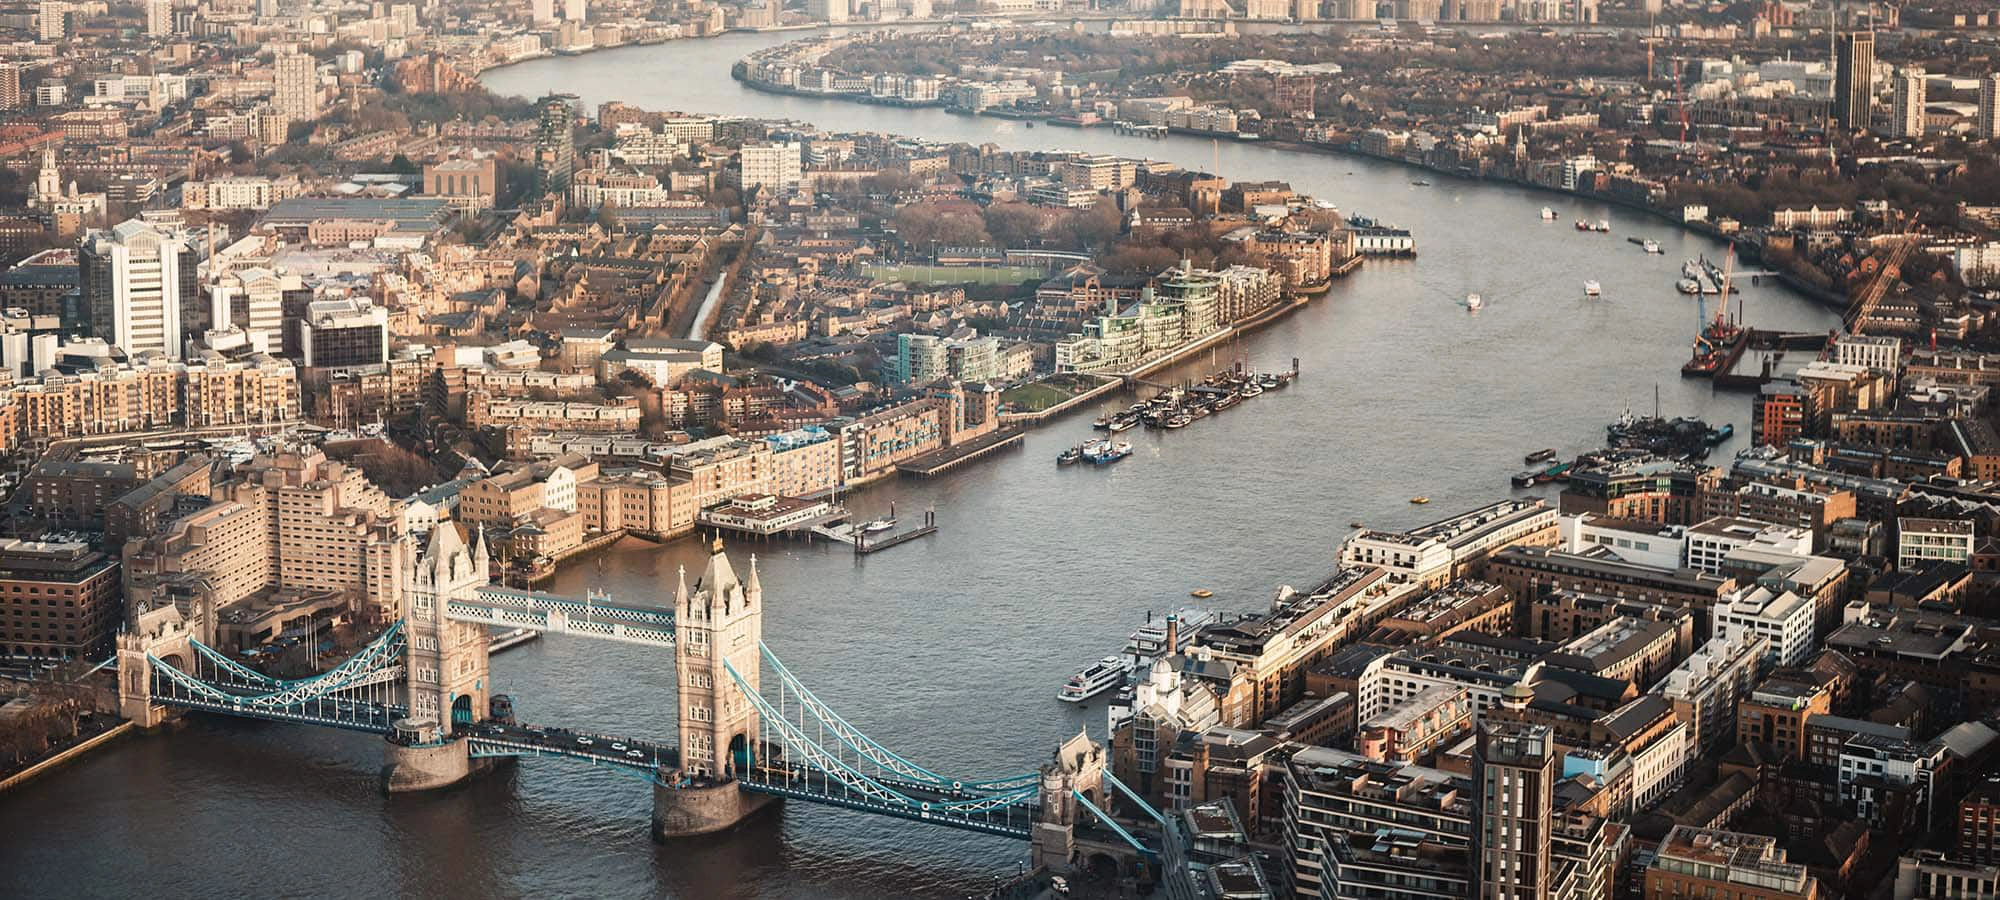 view of London from the sky featuring Tower Bridge